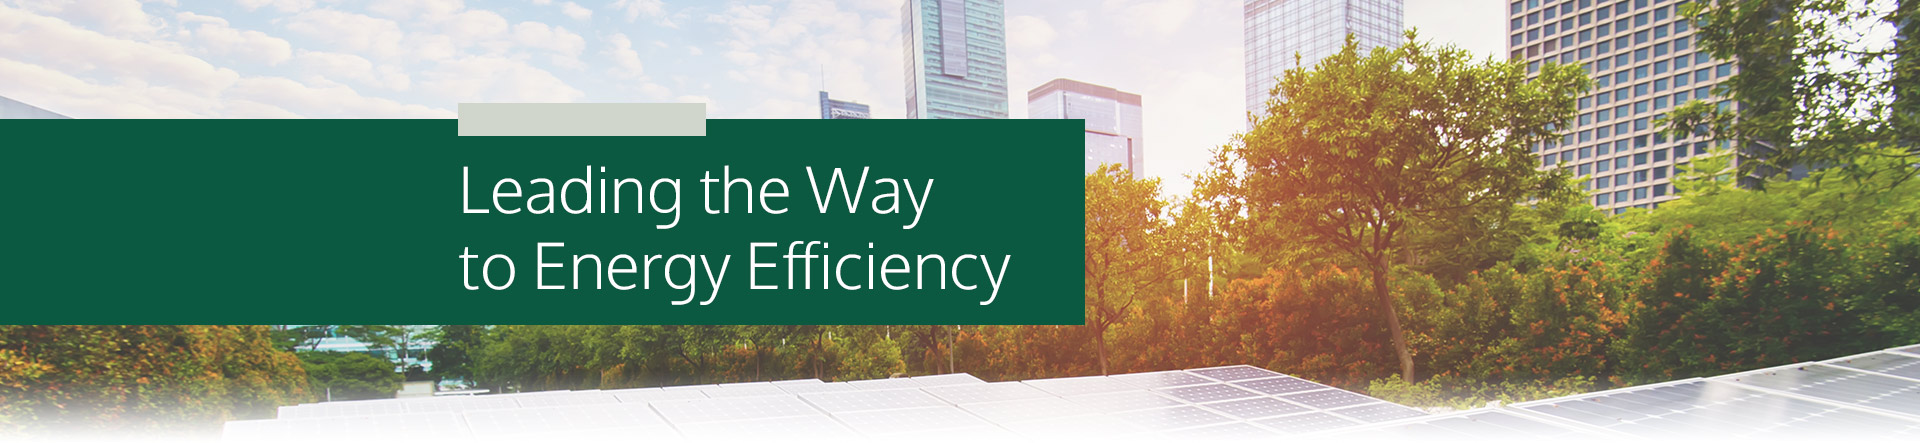 Leading the Way to Energy Efficiency News